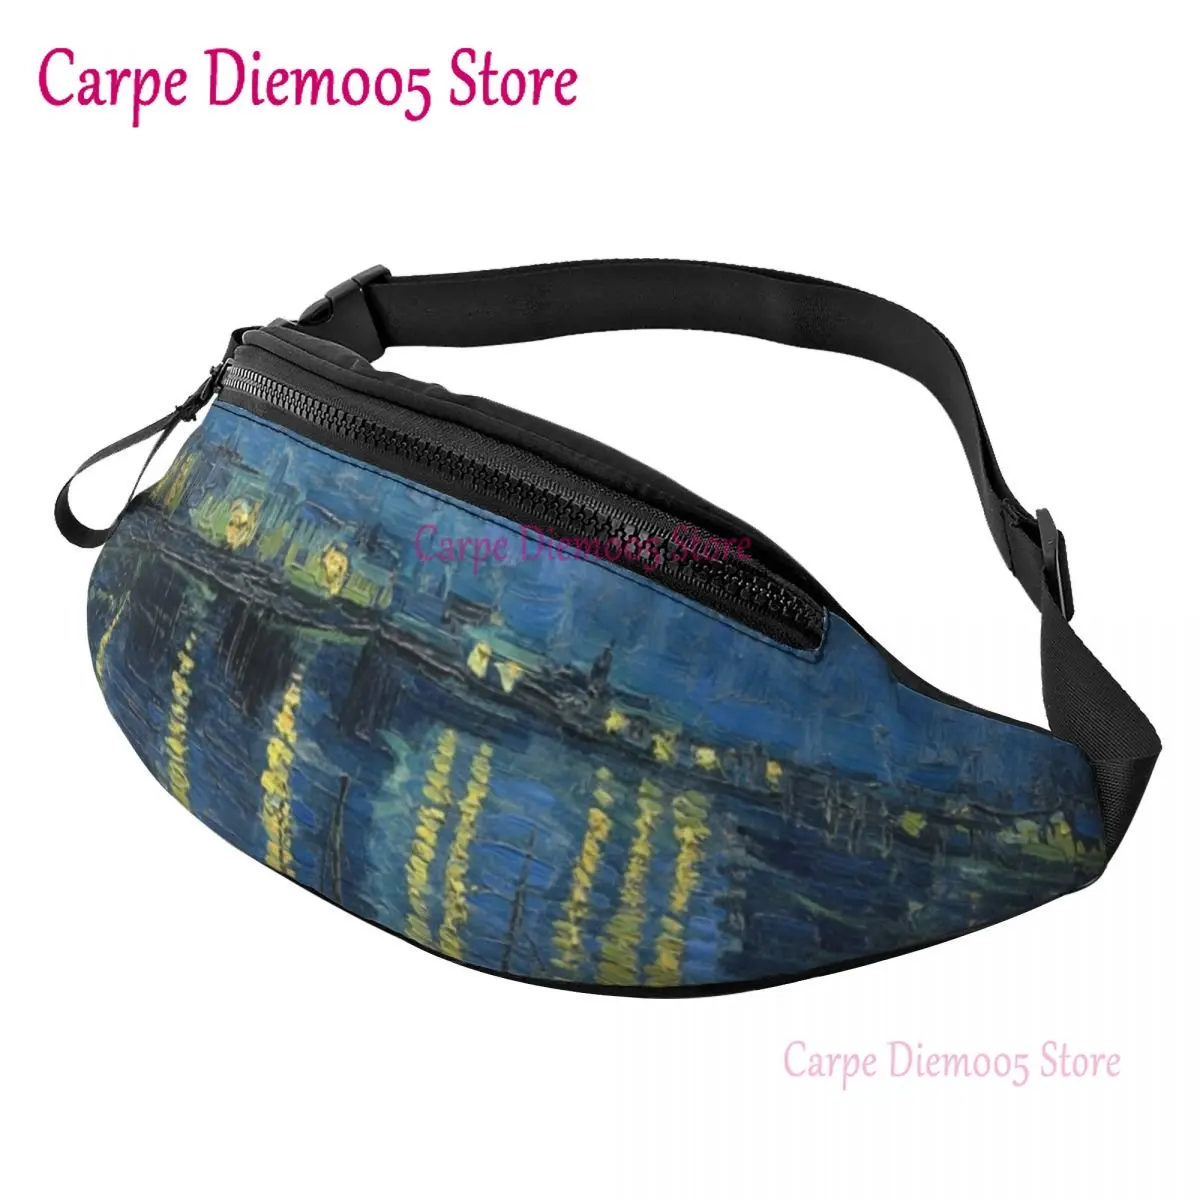 

Starry Night Over The Rhone Fanny Pack for Men Women Cool Vincent Van Gogh Crossbody Waist Bag Traveling Phone Money Pouch